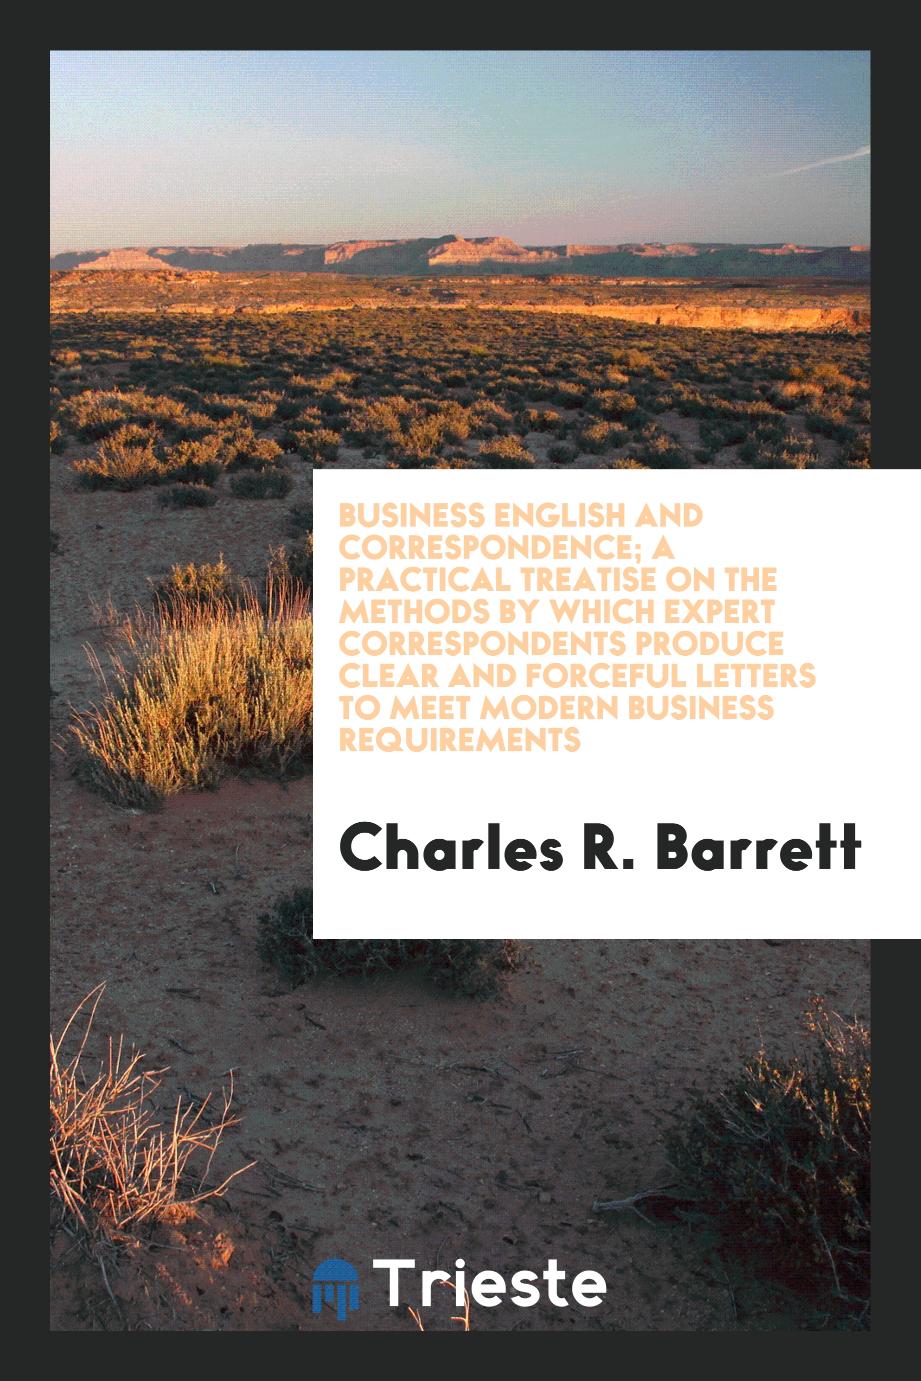 Business English and correspondence; a practical treatise on the methods by which expert correspondents produce clear and forceful letters to meet modern business requirements